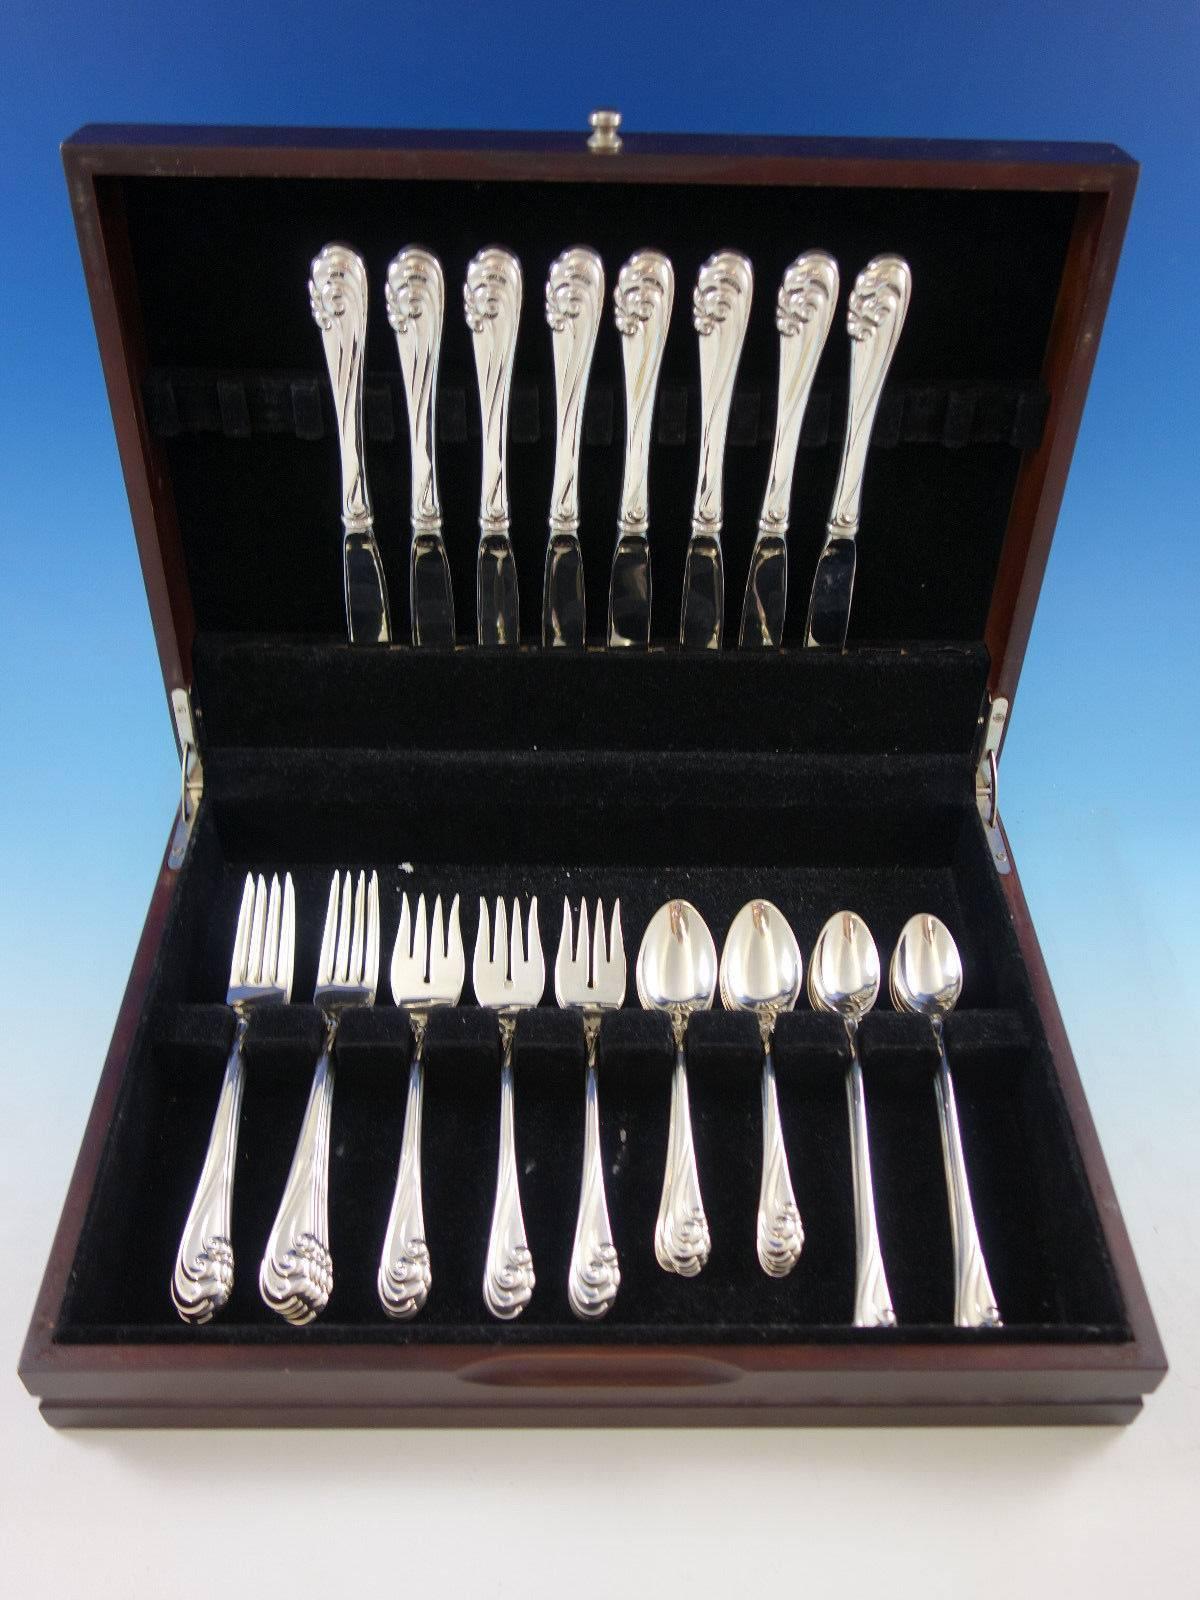 Dancing Surf by Kirk sterling silver flatware set, 40 pieces. This set includes:

Eight knives, 9